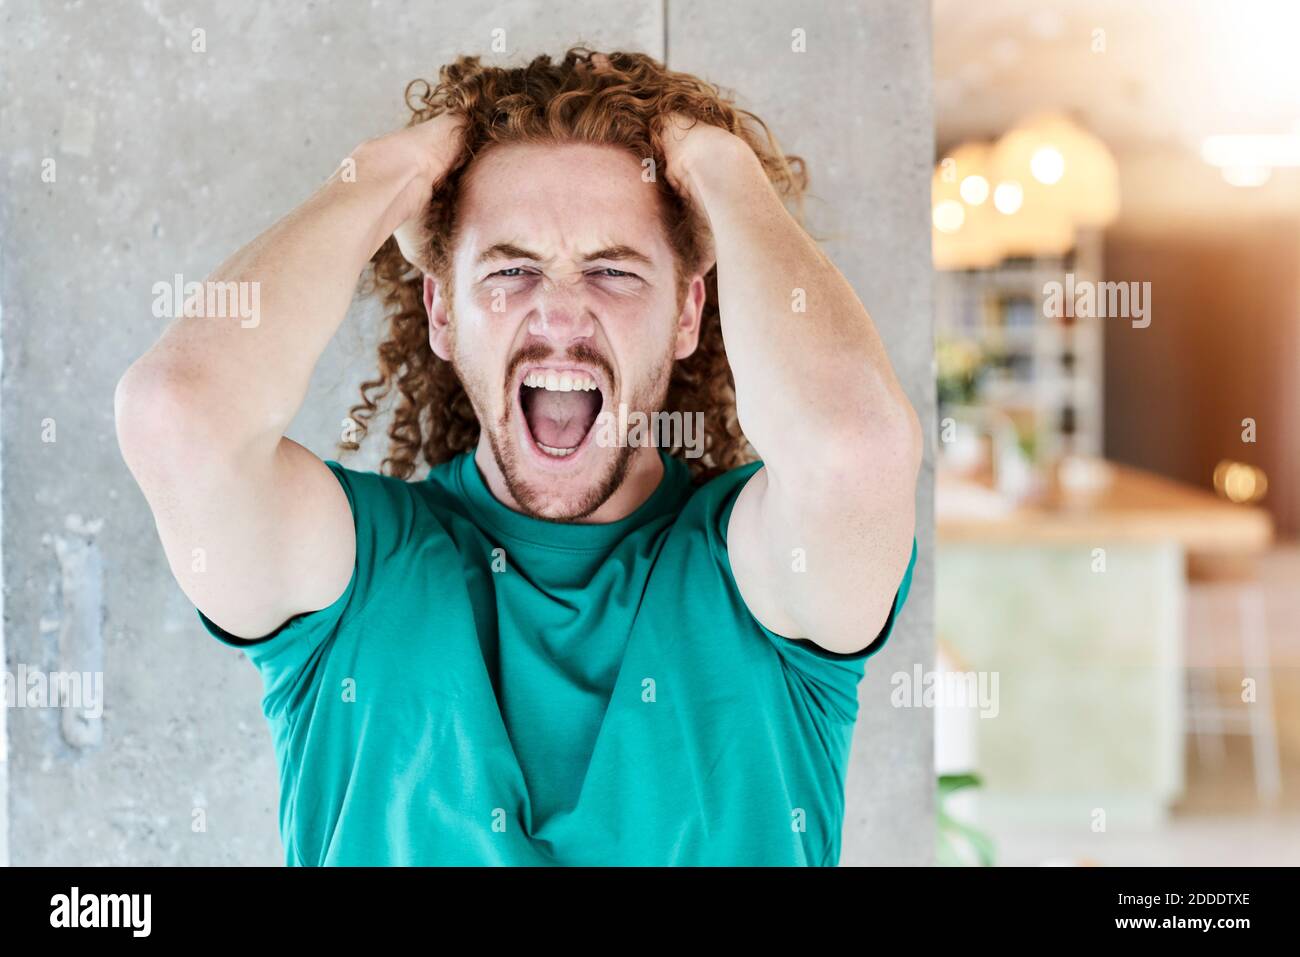 Man in aggression shouting while standing against column at home Stock Photo